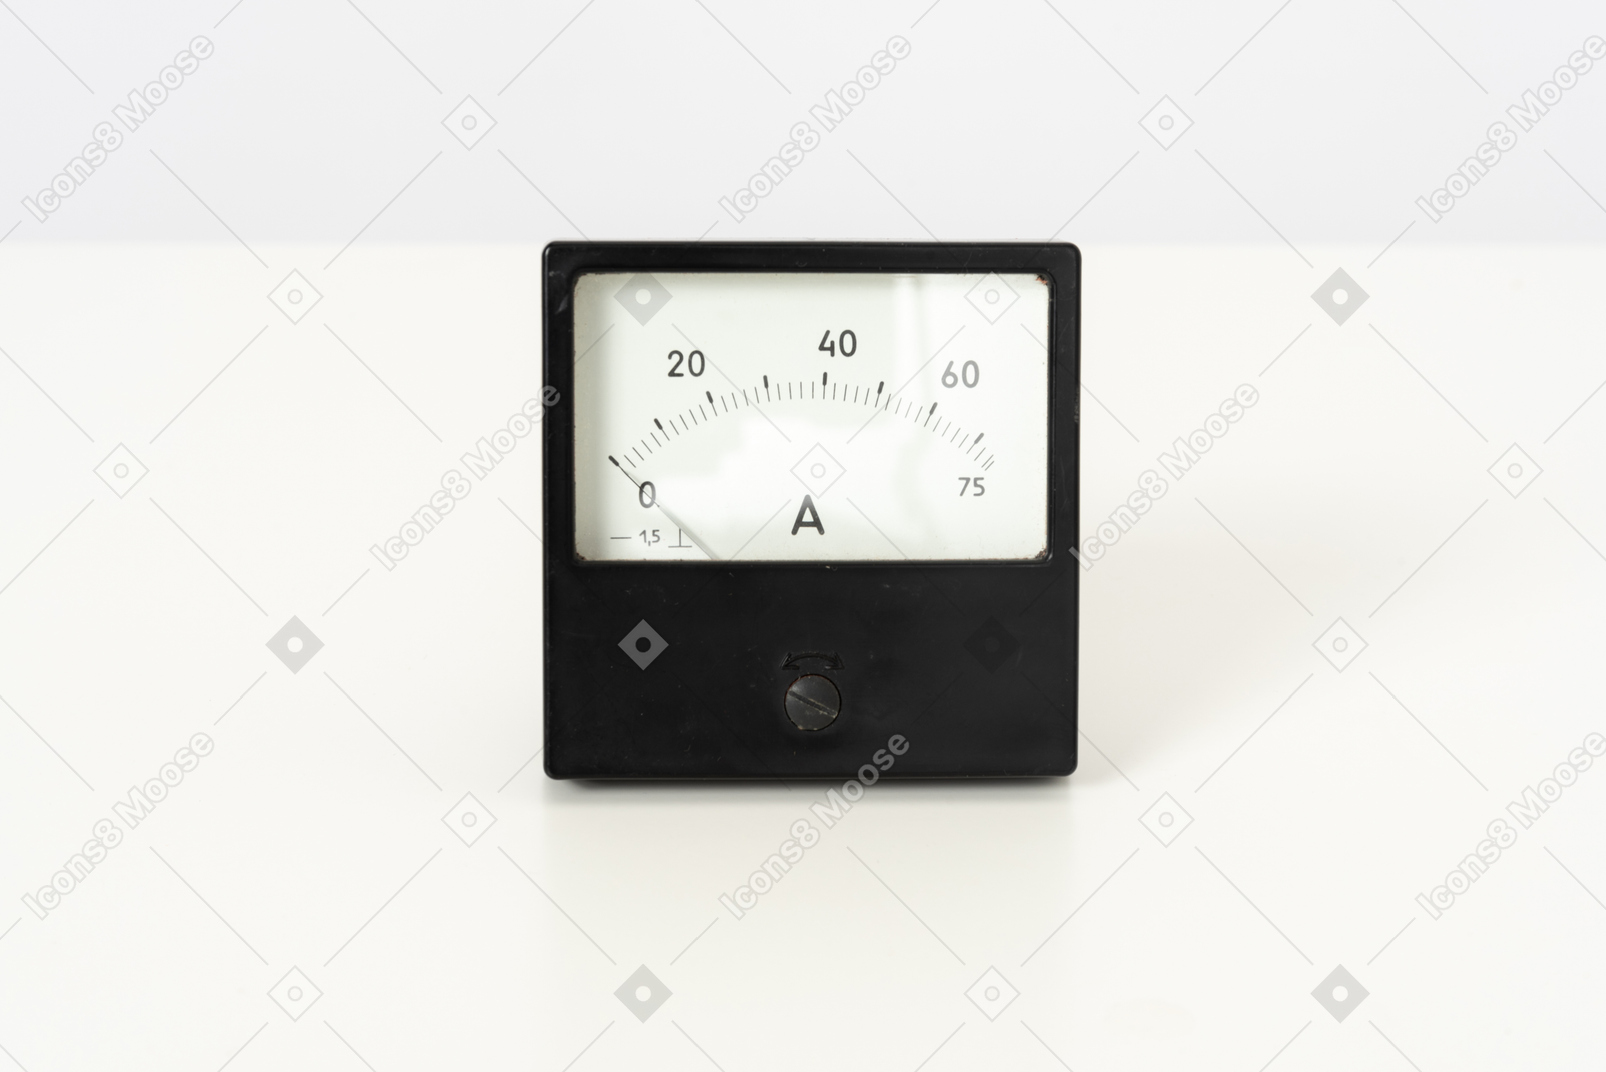 Voltmeter on a white background